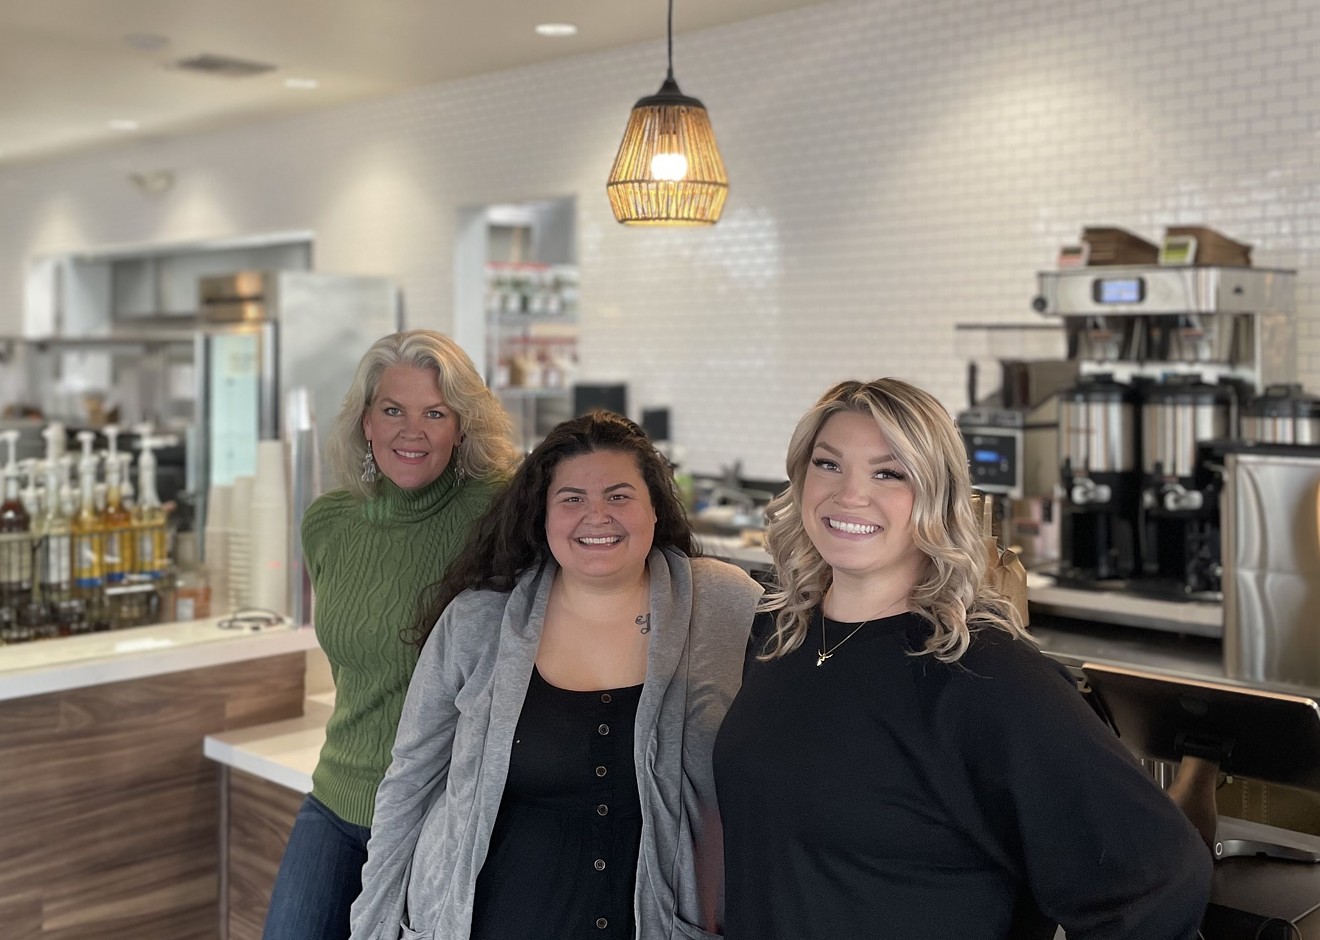 New Penny Café is the first venture together for Queendom Concepts owners, from left, Laura Hansen, Brittany Salazar, and Deni Banach.